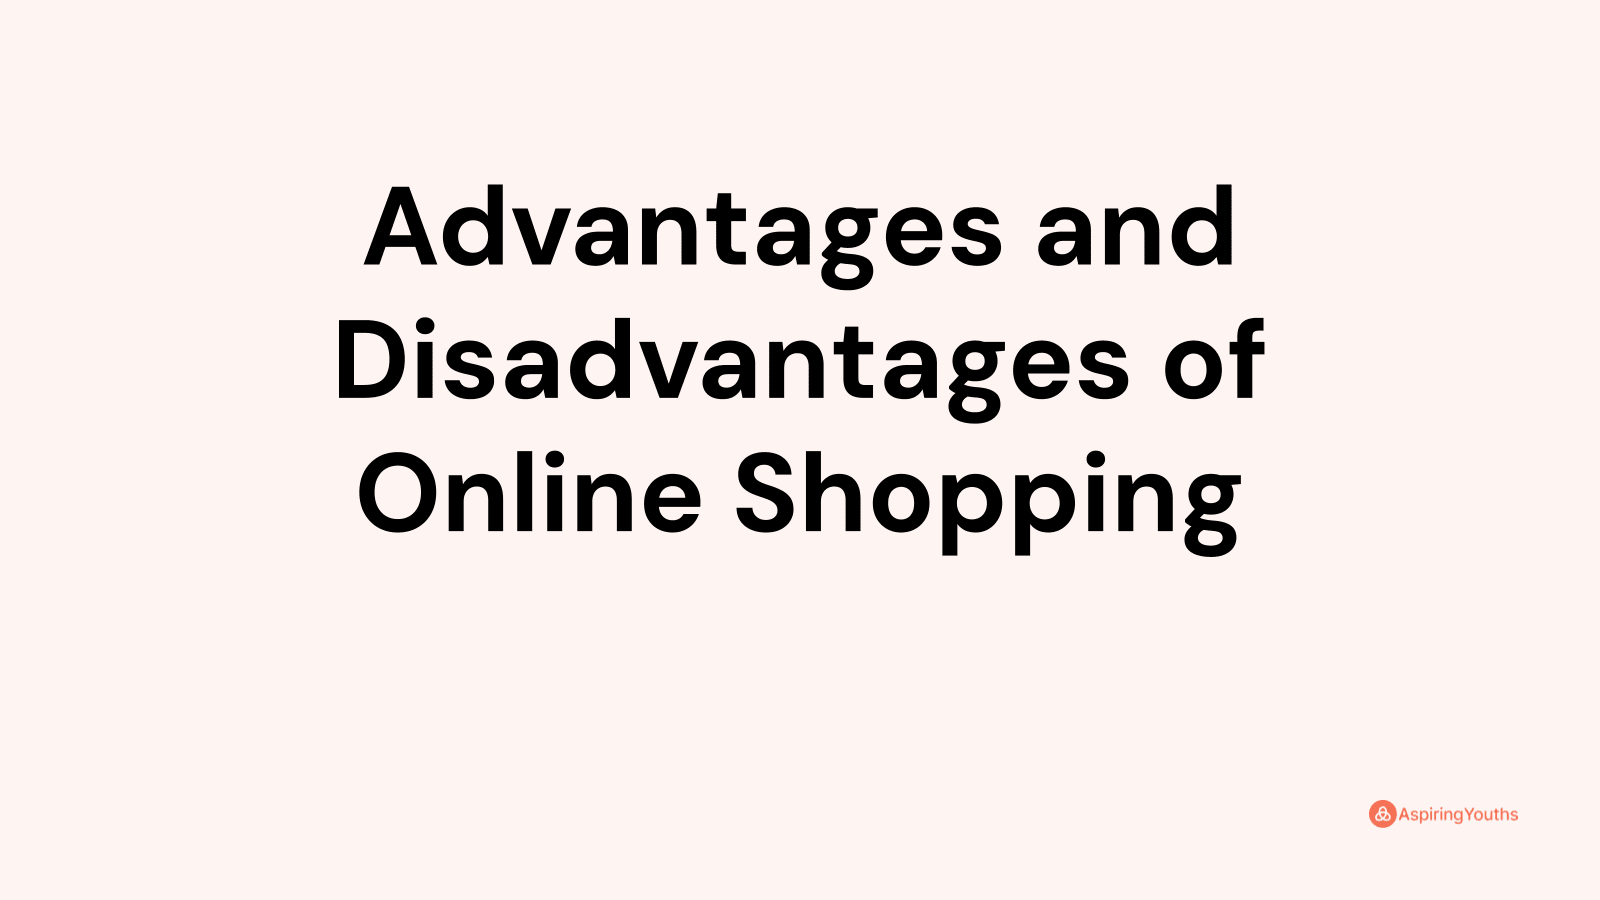 Advantages and disadvantages of Online Shopping